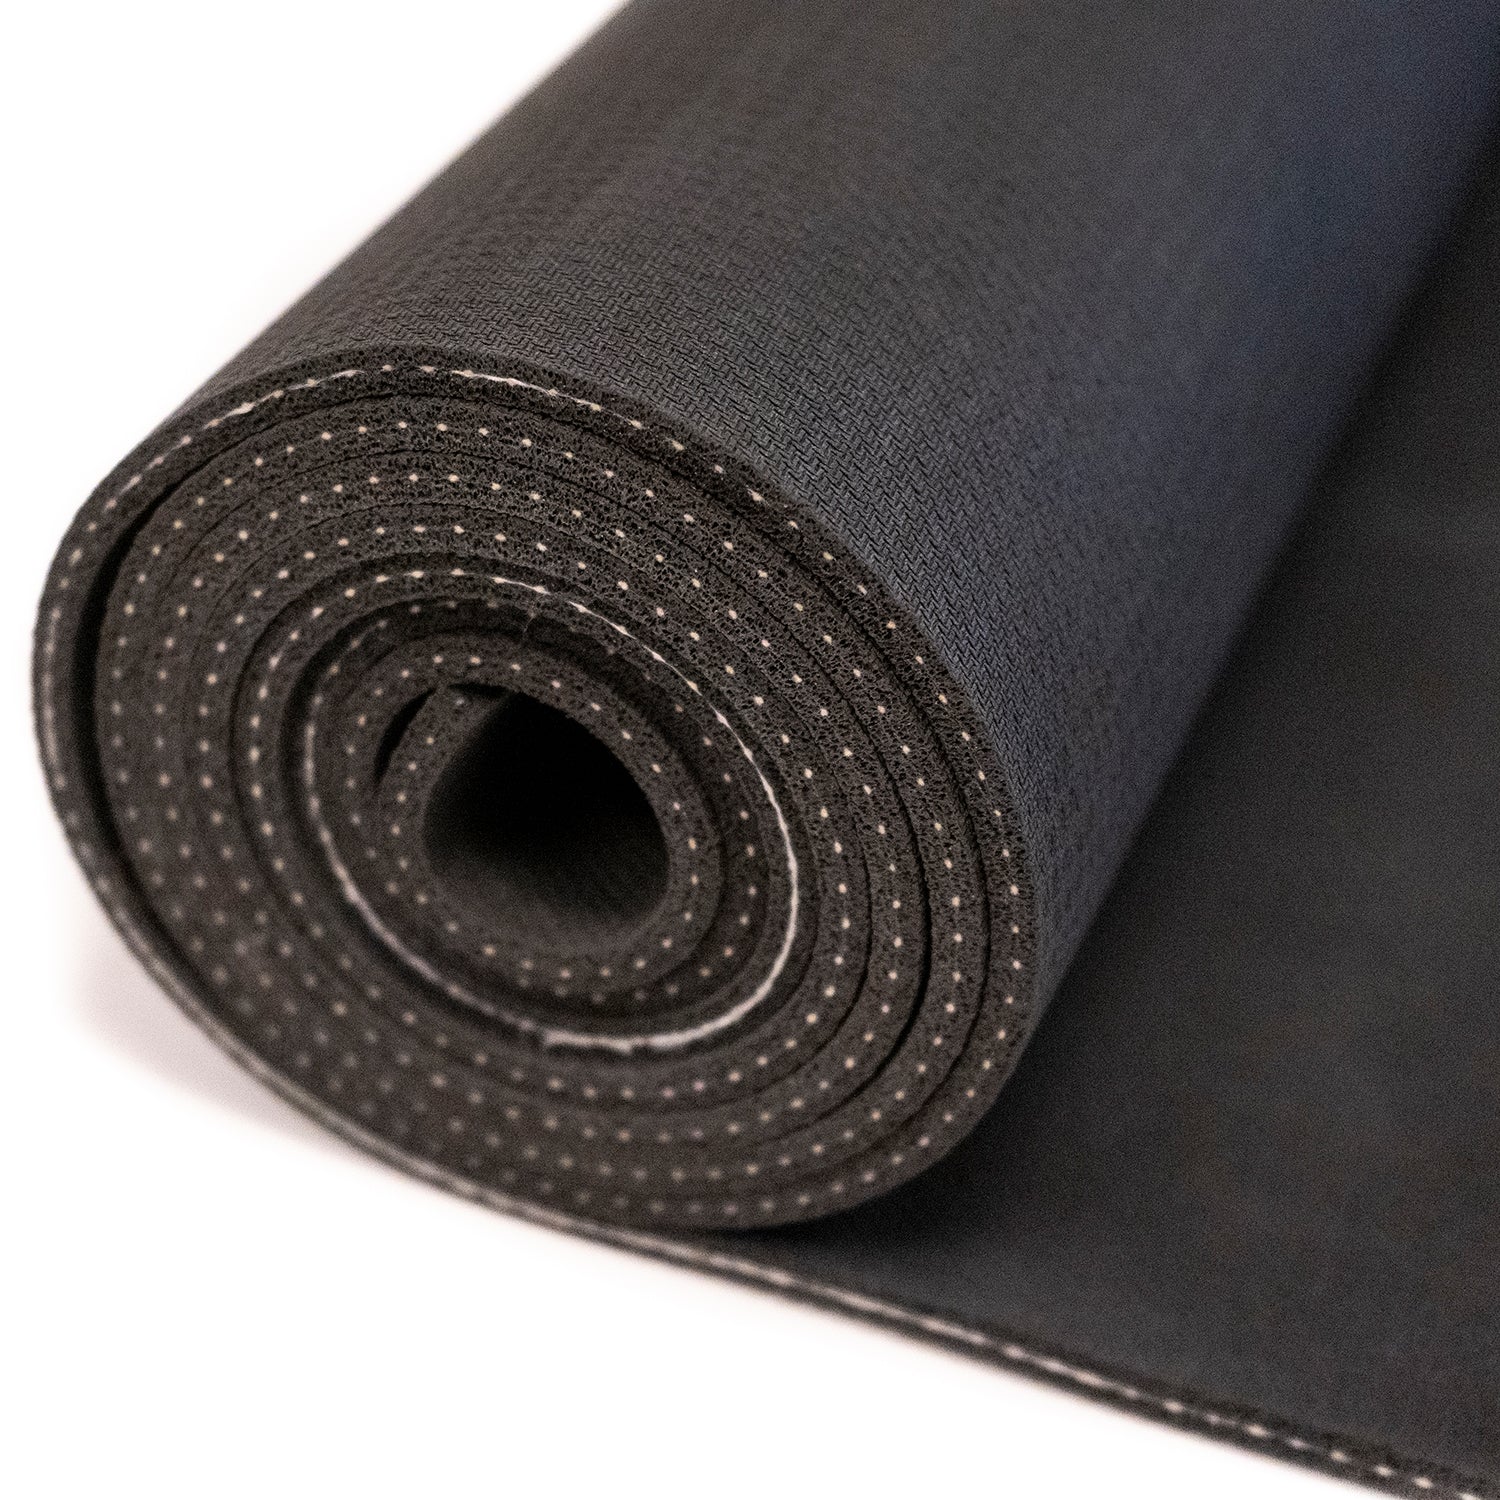 Natural rubber yoga mat Category